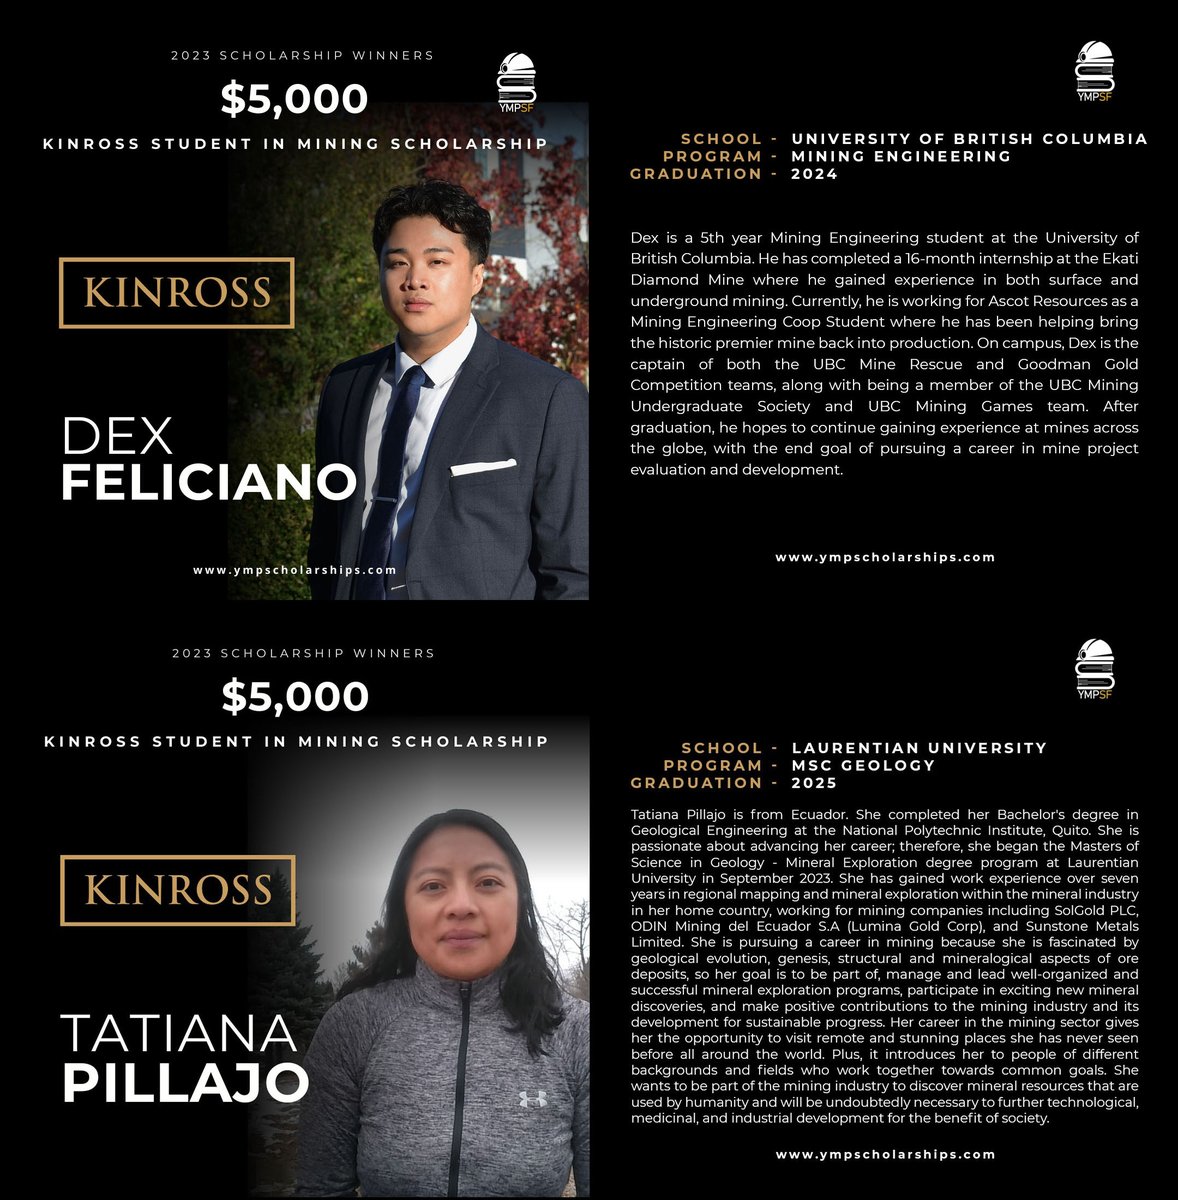 We are excited to announce the recipients of Kinross’ Student in Mining Scholarship in partnership with @YMPToronto! Congratulations Dex Feliciano from the University of British Columbia, and Tatiana Pillajo from Laurentian University!